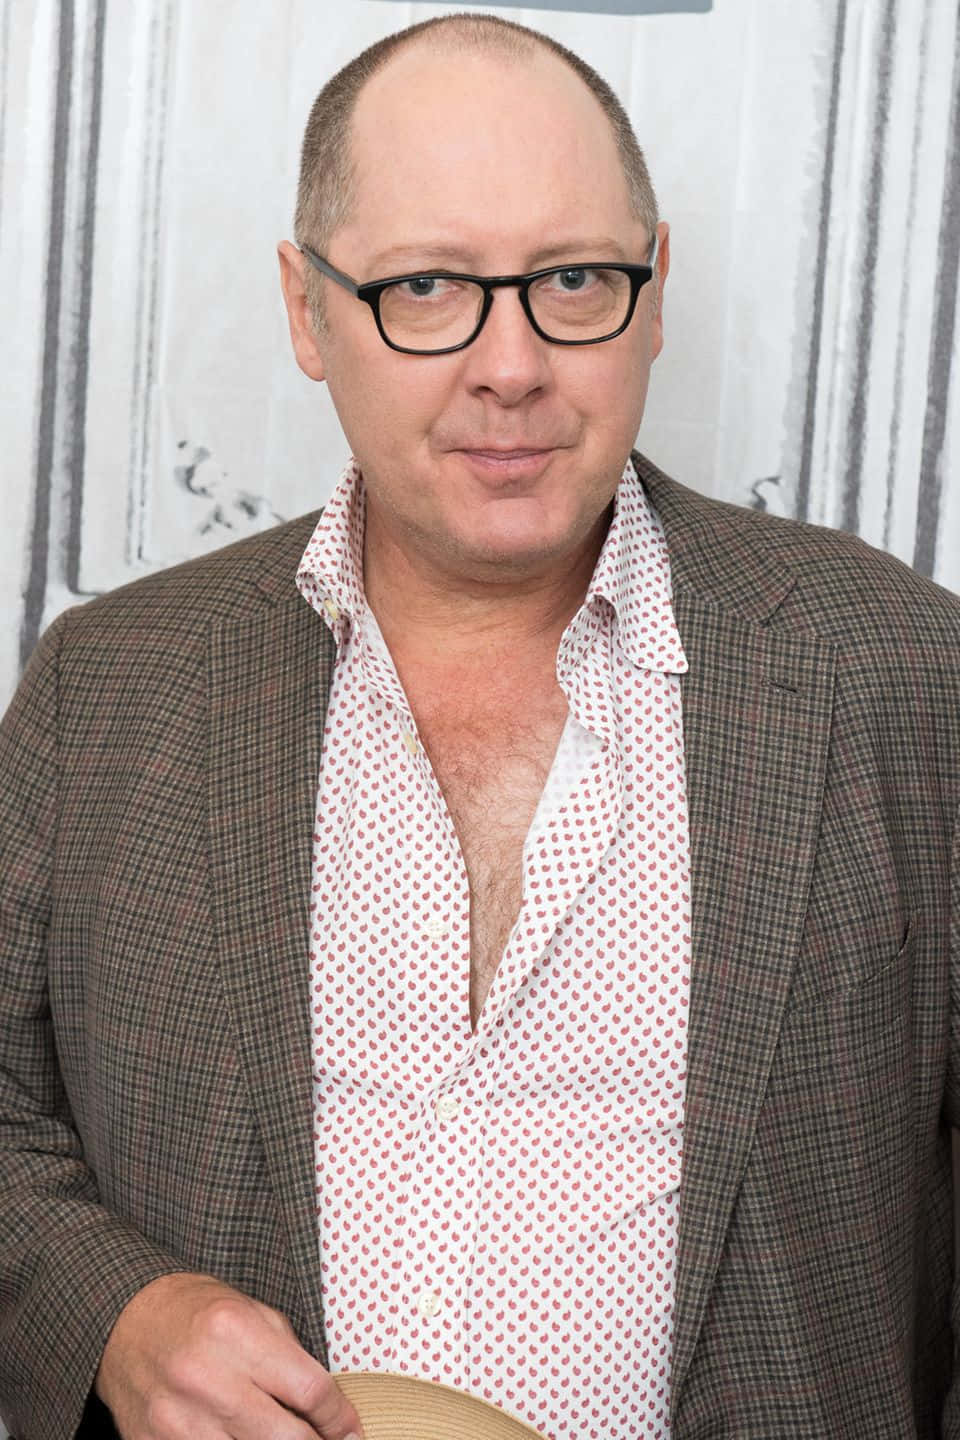 Jamesspader Is An American Actor Known For His Roles In Films And Television Shows. In The Context Of Computer Or Mobile Wallpaper, You Can Use Pictures Of James Spader As Wallpaper For Your Devices. Fondo de pantalla